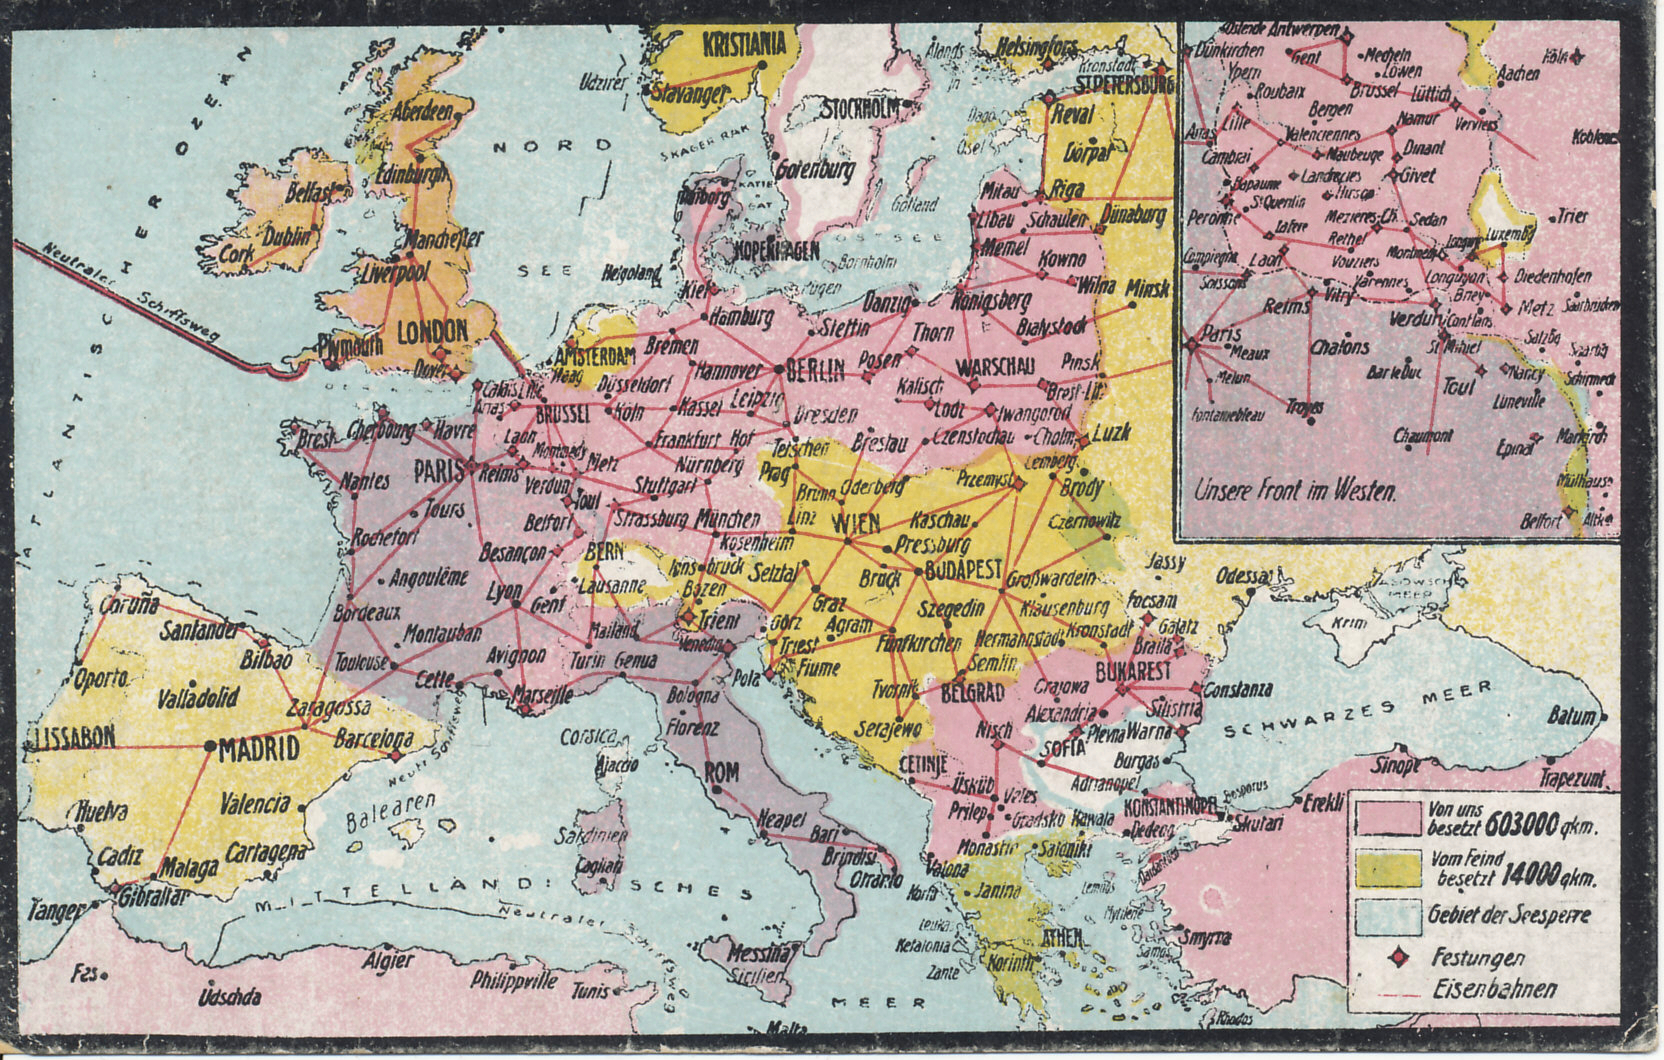 Railroad and occupied territory map of western and central Europe, northern Africa, and Turkey. A German postcard map postdating the taking of Riga  on the Baltic Sea on September 3, 1917. The inset shows the Western Front and French-occupied territory in Alsace, then German Elsass.
Text:
Von uns besetzt 603000 qkm.
Vom Feind besetzt 14000 qkm.
Gebiet der Seesperre
Festungen
Eisenbahnen
Neutraler Schiffsweg
Unser Front im Westen.
We occupy 603,000 square kilometers.
The enemy occupies 14,000 square kilometers.
Area of blockade
fortresses
railways
neutral shipping route
Our front in the West.
Reverse:
Europa im Weltkrieg.
(Zugelassen vom Ministerium des Innern.)
No. 15. Druck u. Verlag v. Felix Grosser, Dresden-A.1.
Europe in the World War.
(Approved by the Ministry of the Interior.)
No. 15. Printing and Publishing bu Felix Grosser, Dresden A.1.